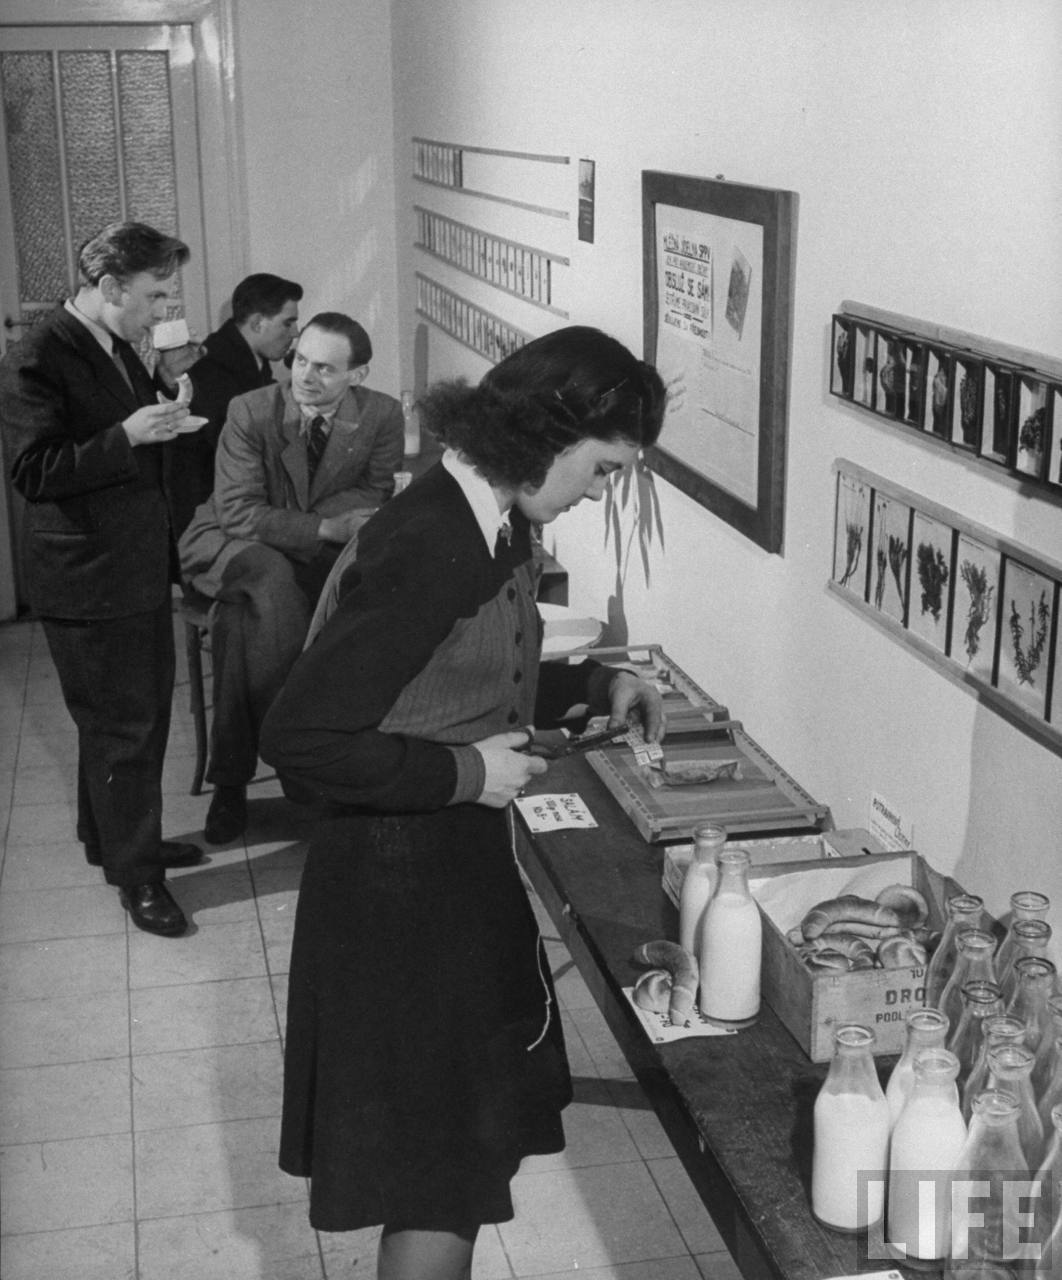 Charles University student clipping ration ticket for two bottles of milk and two rolls at cooperative milk bar run by the Science students.